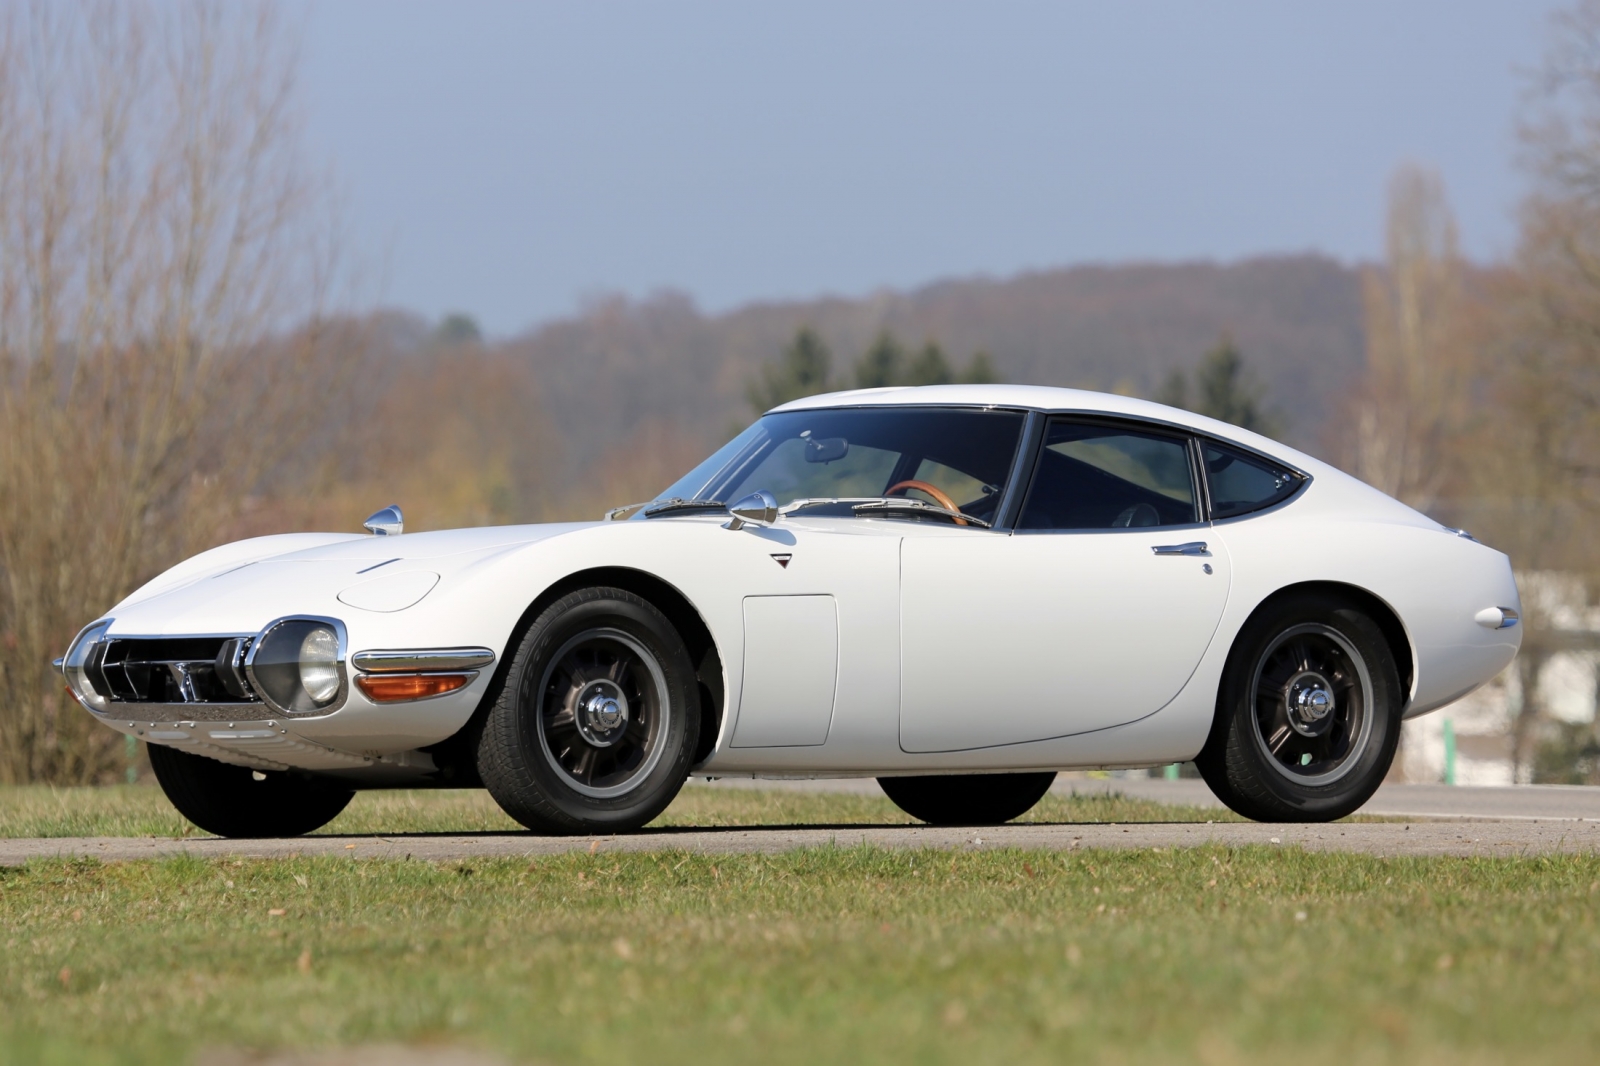 Toyota 2000 Gt - Top 5 Videos And 60+ Images